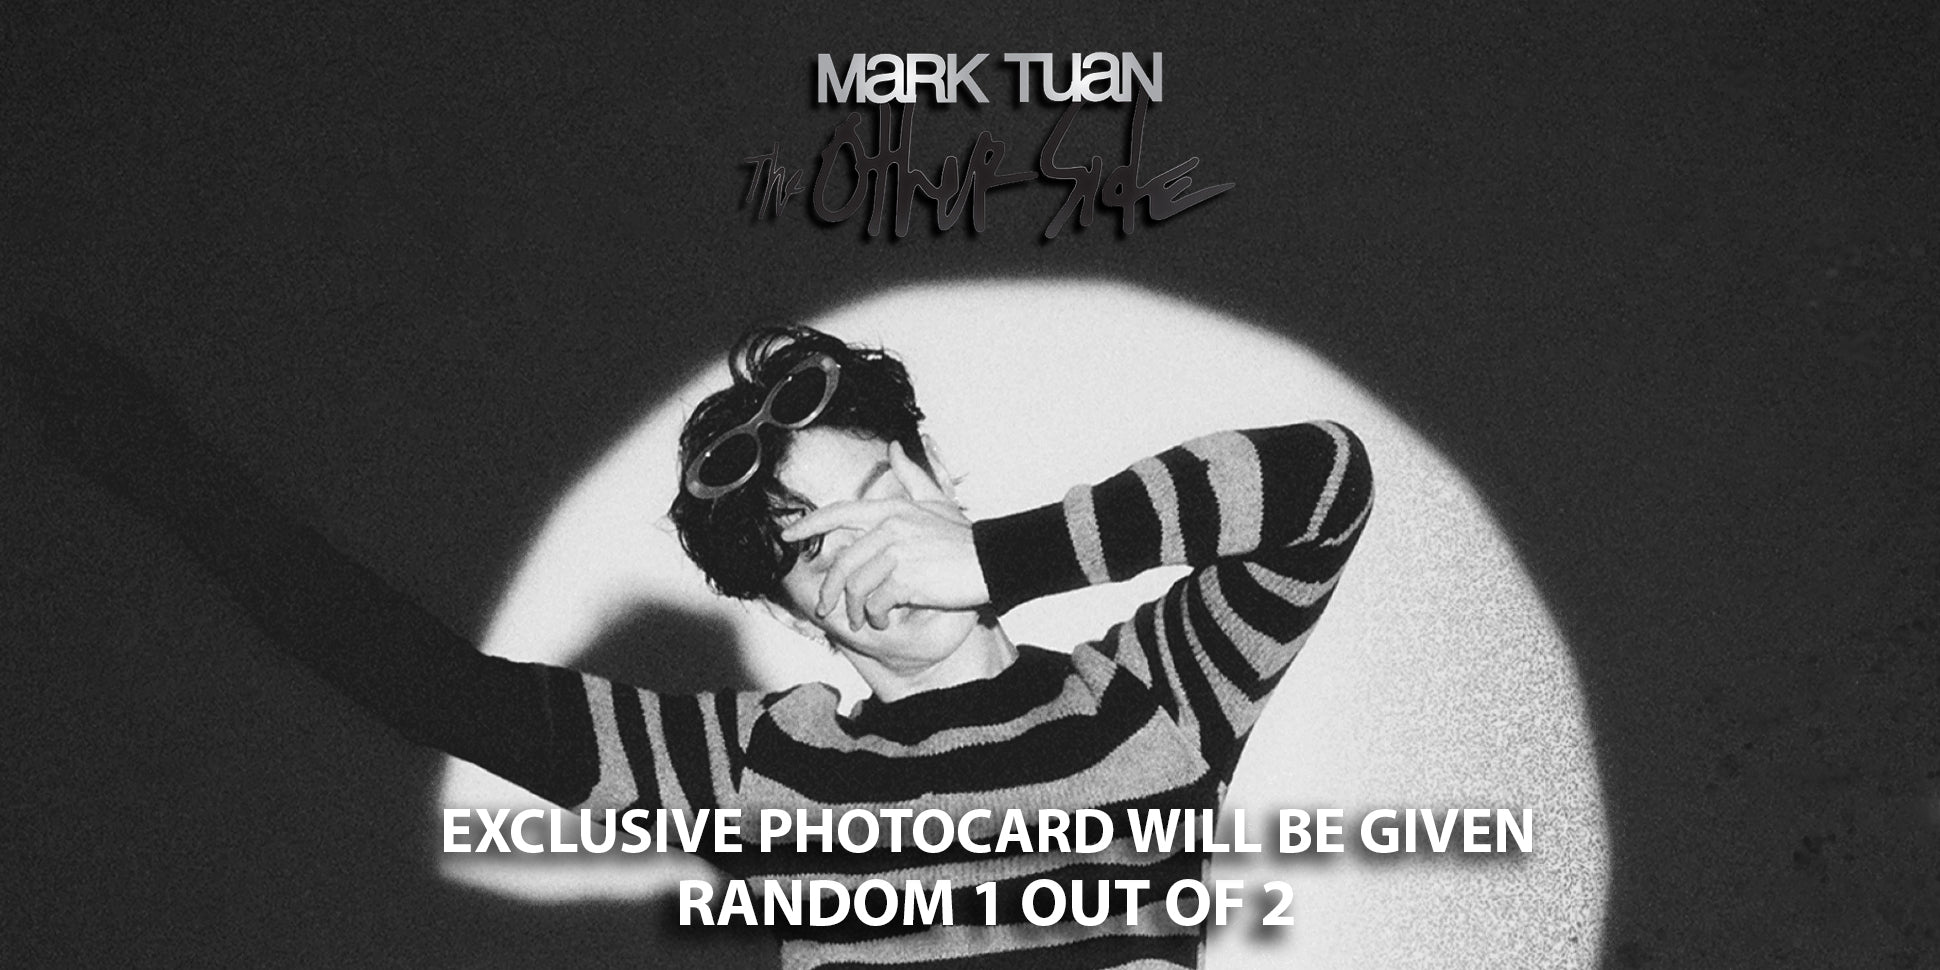 MARK TUAN (GOT7) ALBUM 'THE OTHER SIDE' EVENT